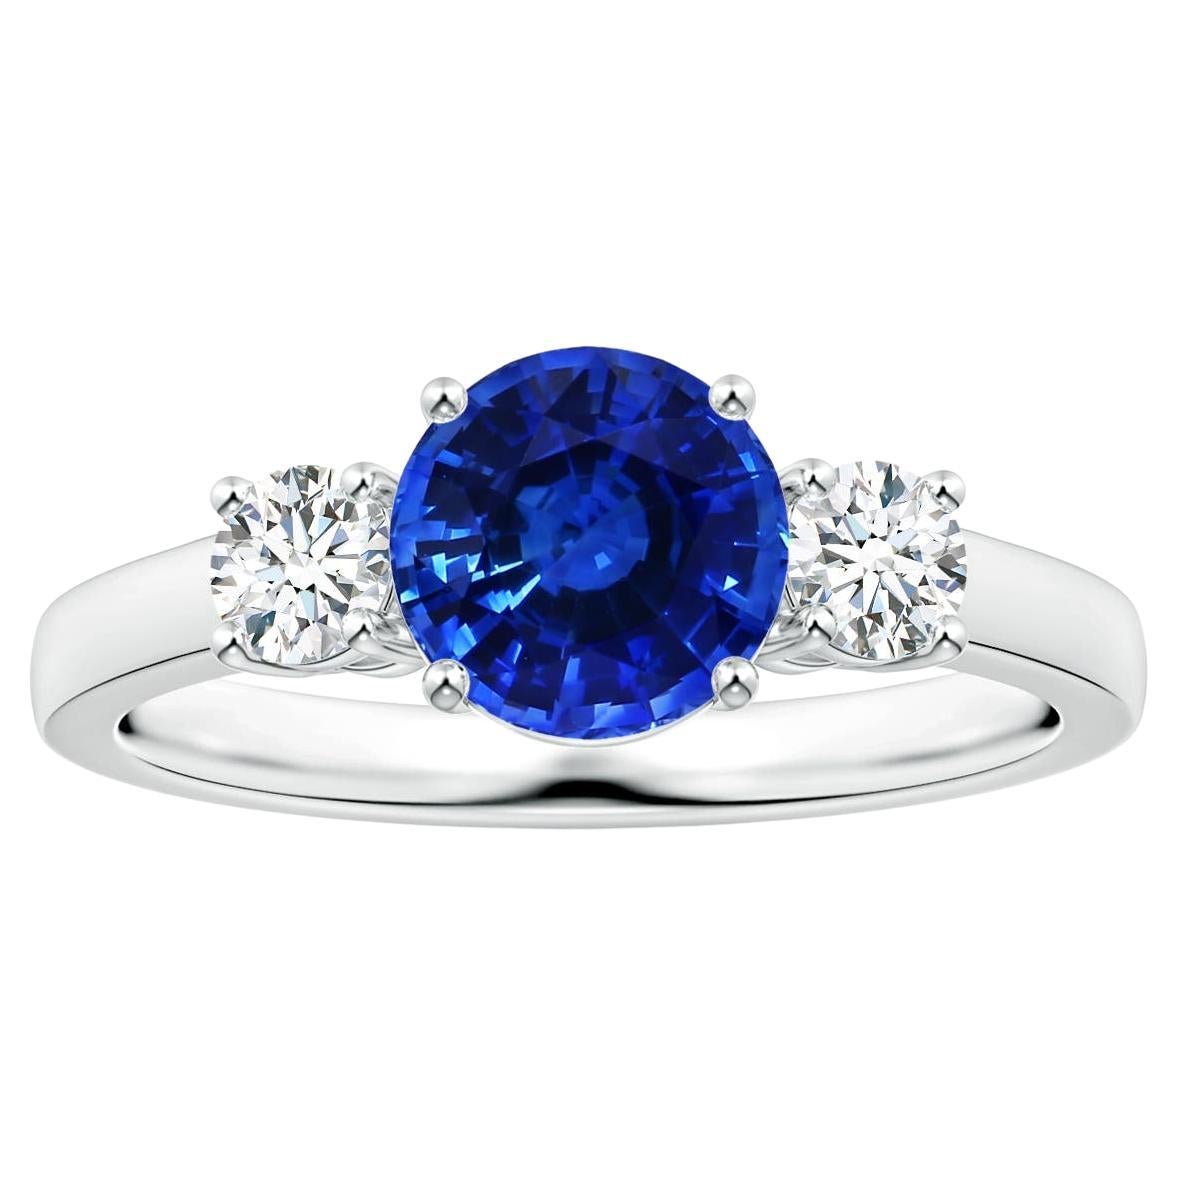 For Sale:  Angara Three Stone GIA Certified Blue Sapphire Ring in Platinum with Diamonds